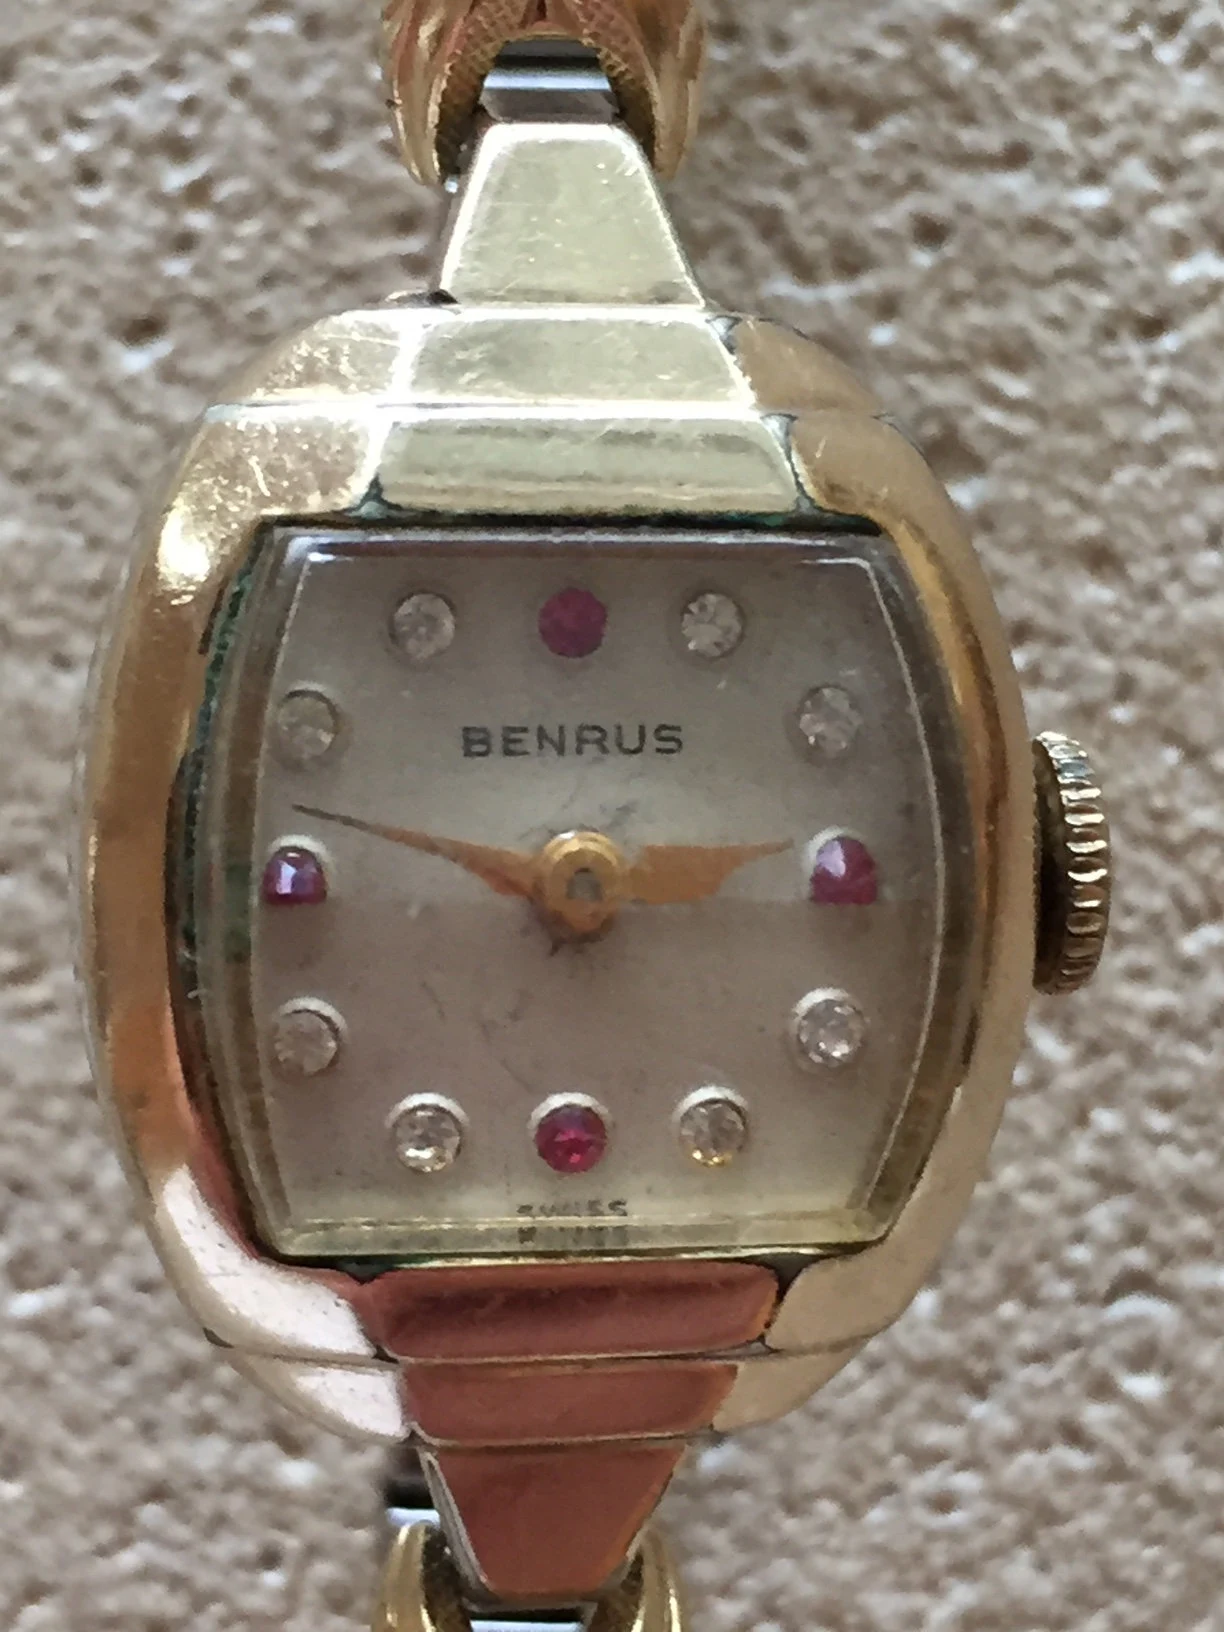 How to Identify an Antique Benrus Watch